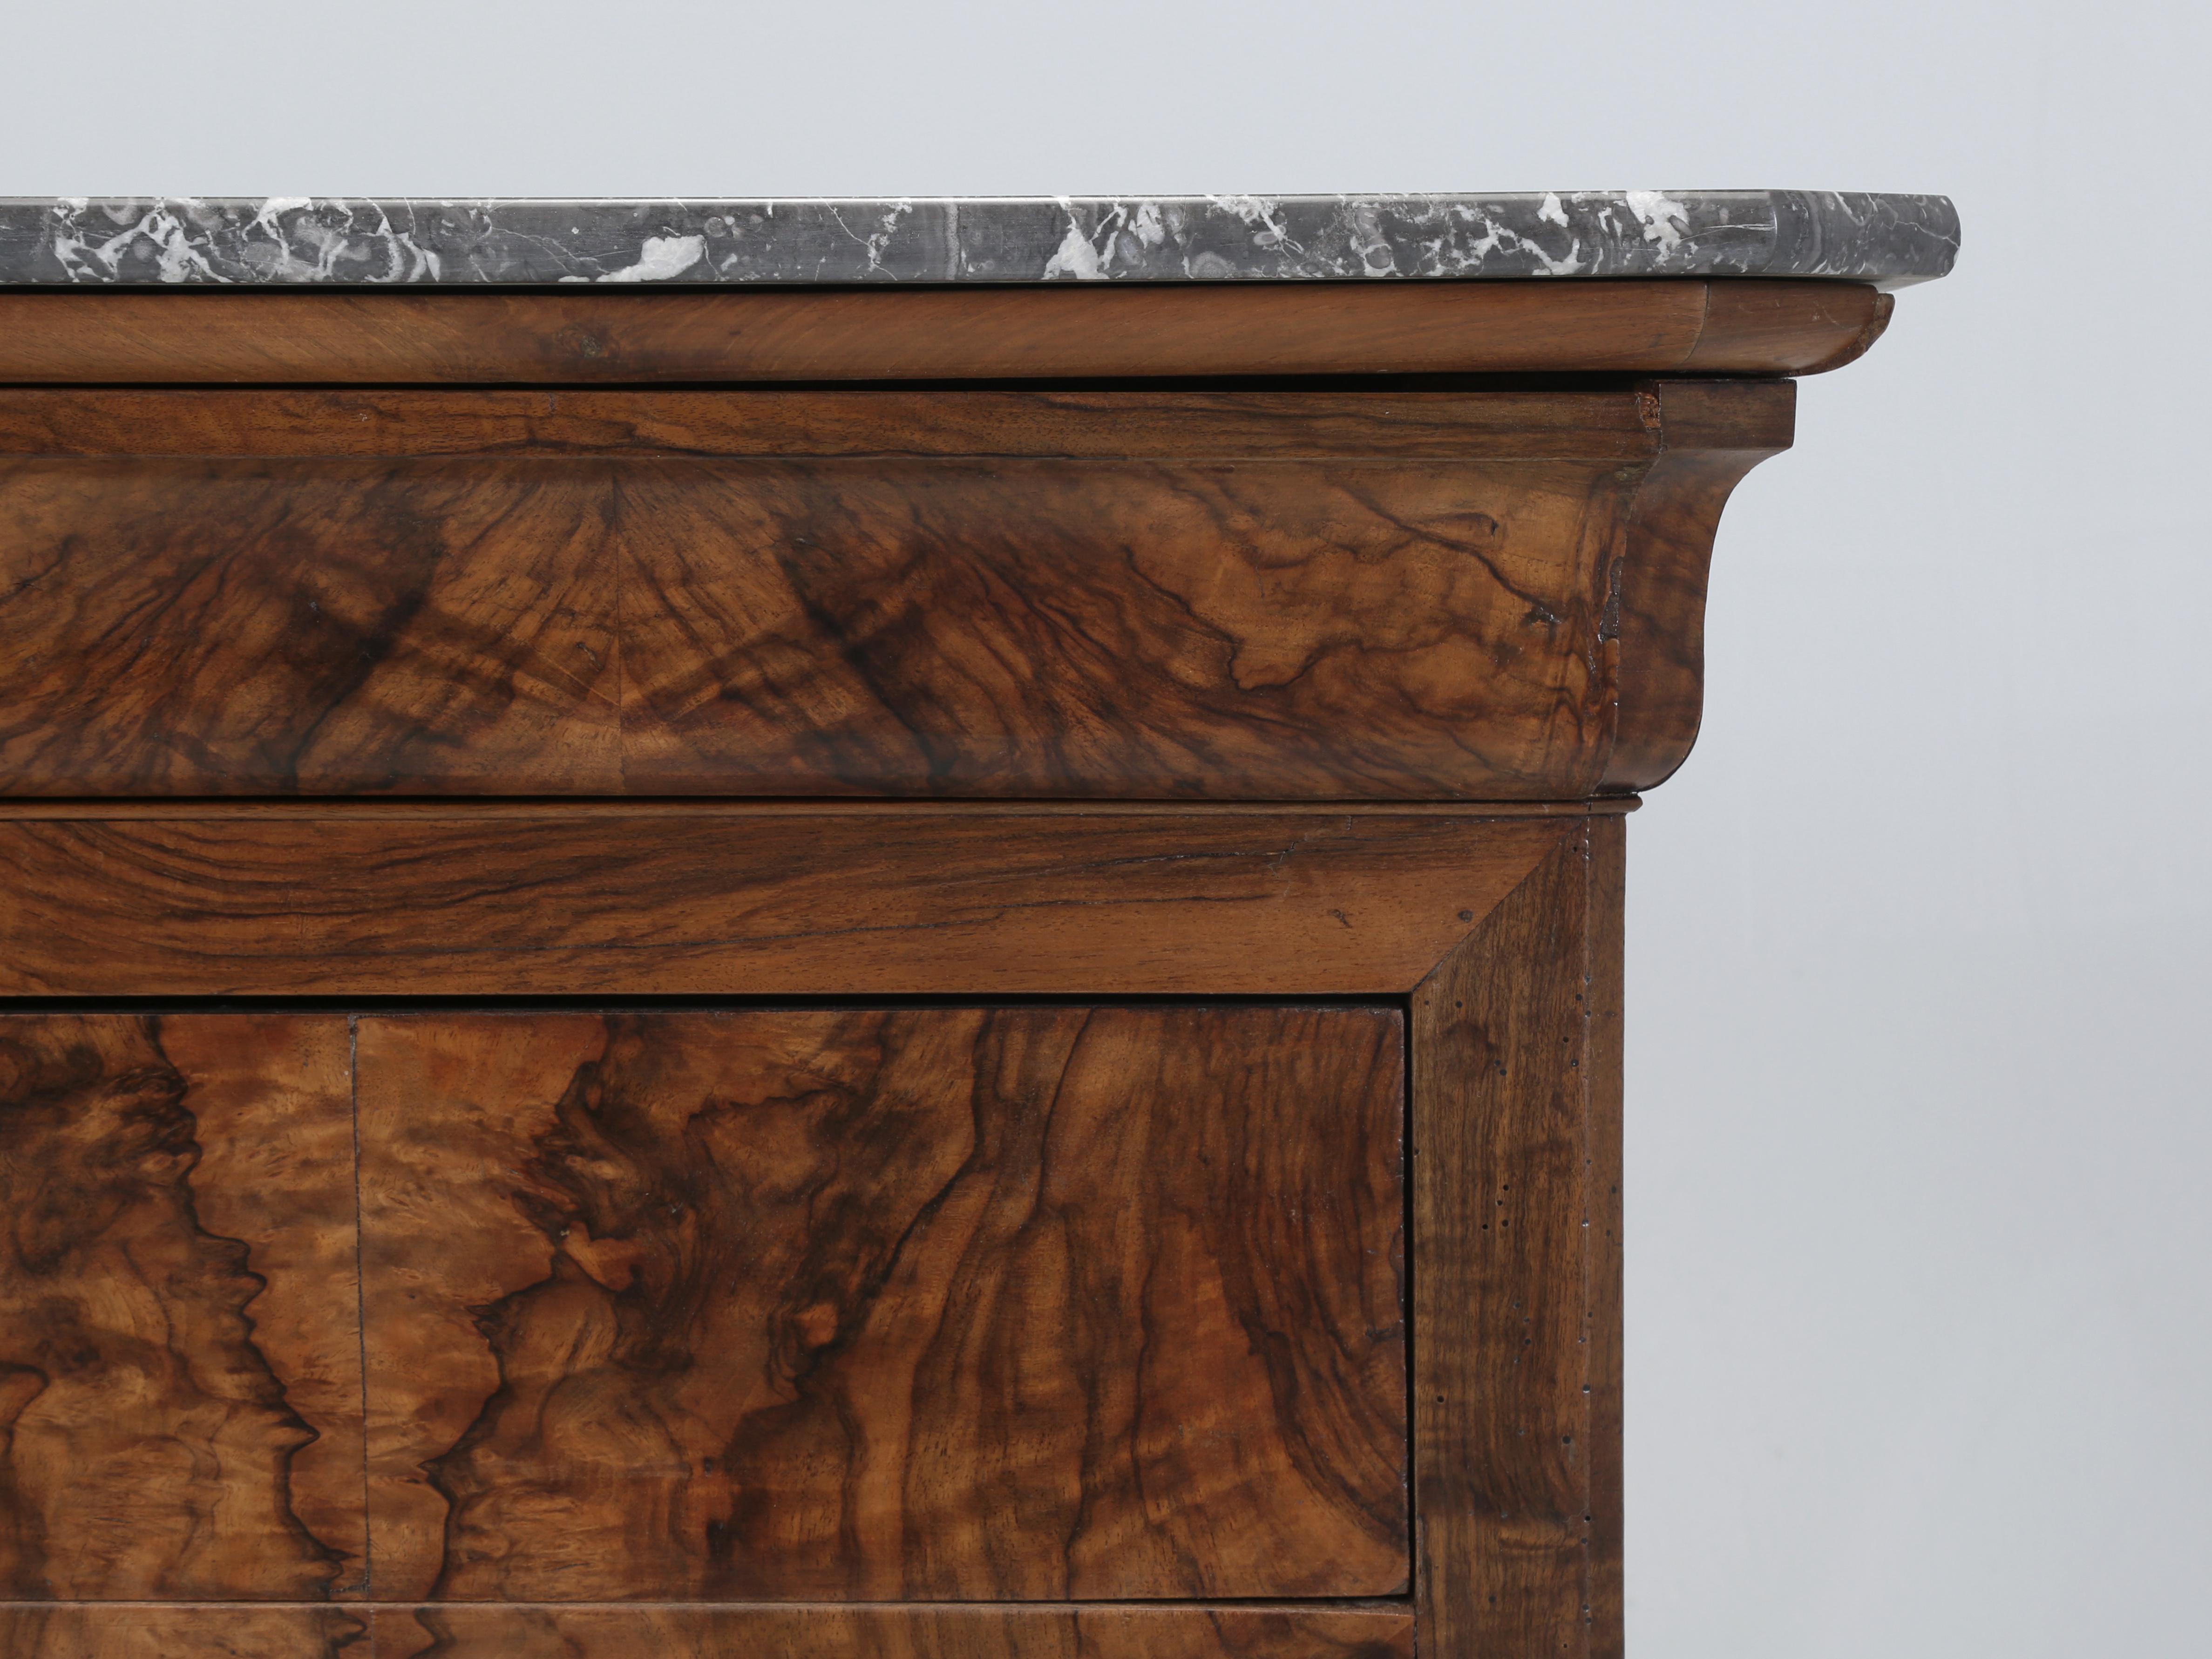 Antique French Commode Louis Philippe Style Burl Walnut Book-Matched Marble Top For Sale 3